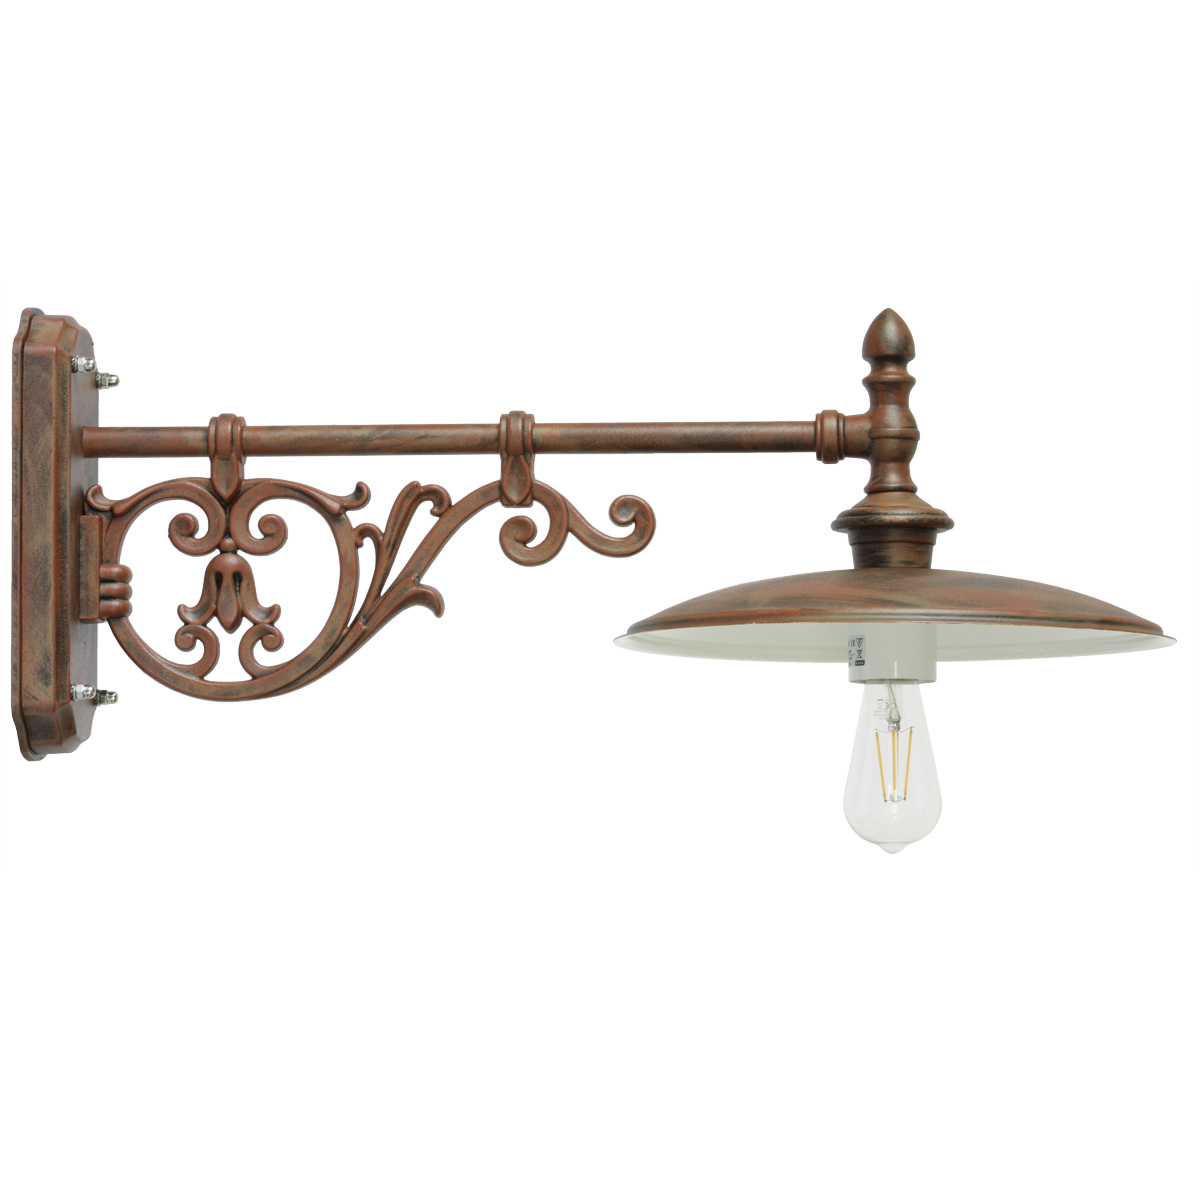 Wall Light for Outdoors with Decorative Historic Bracket